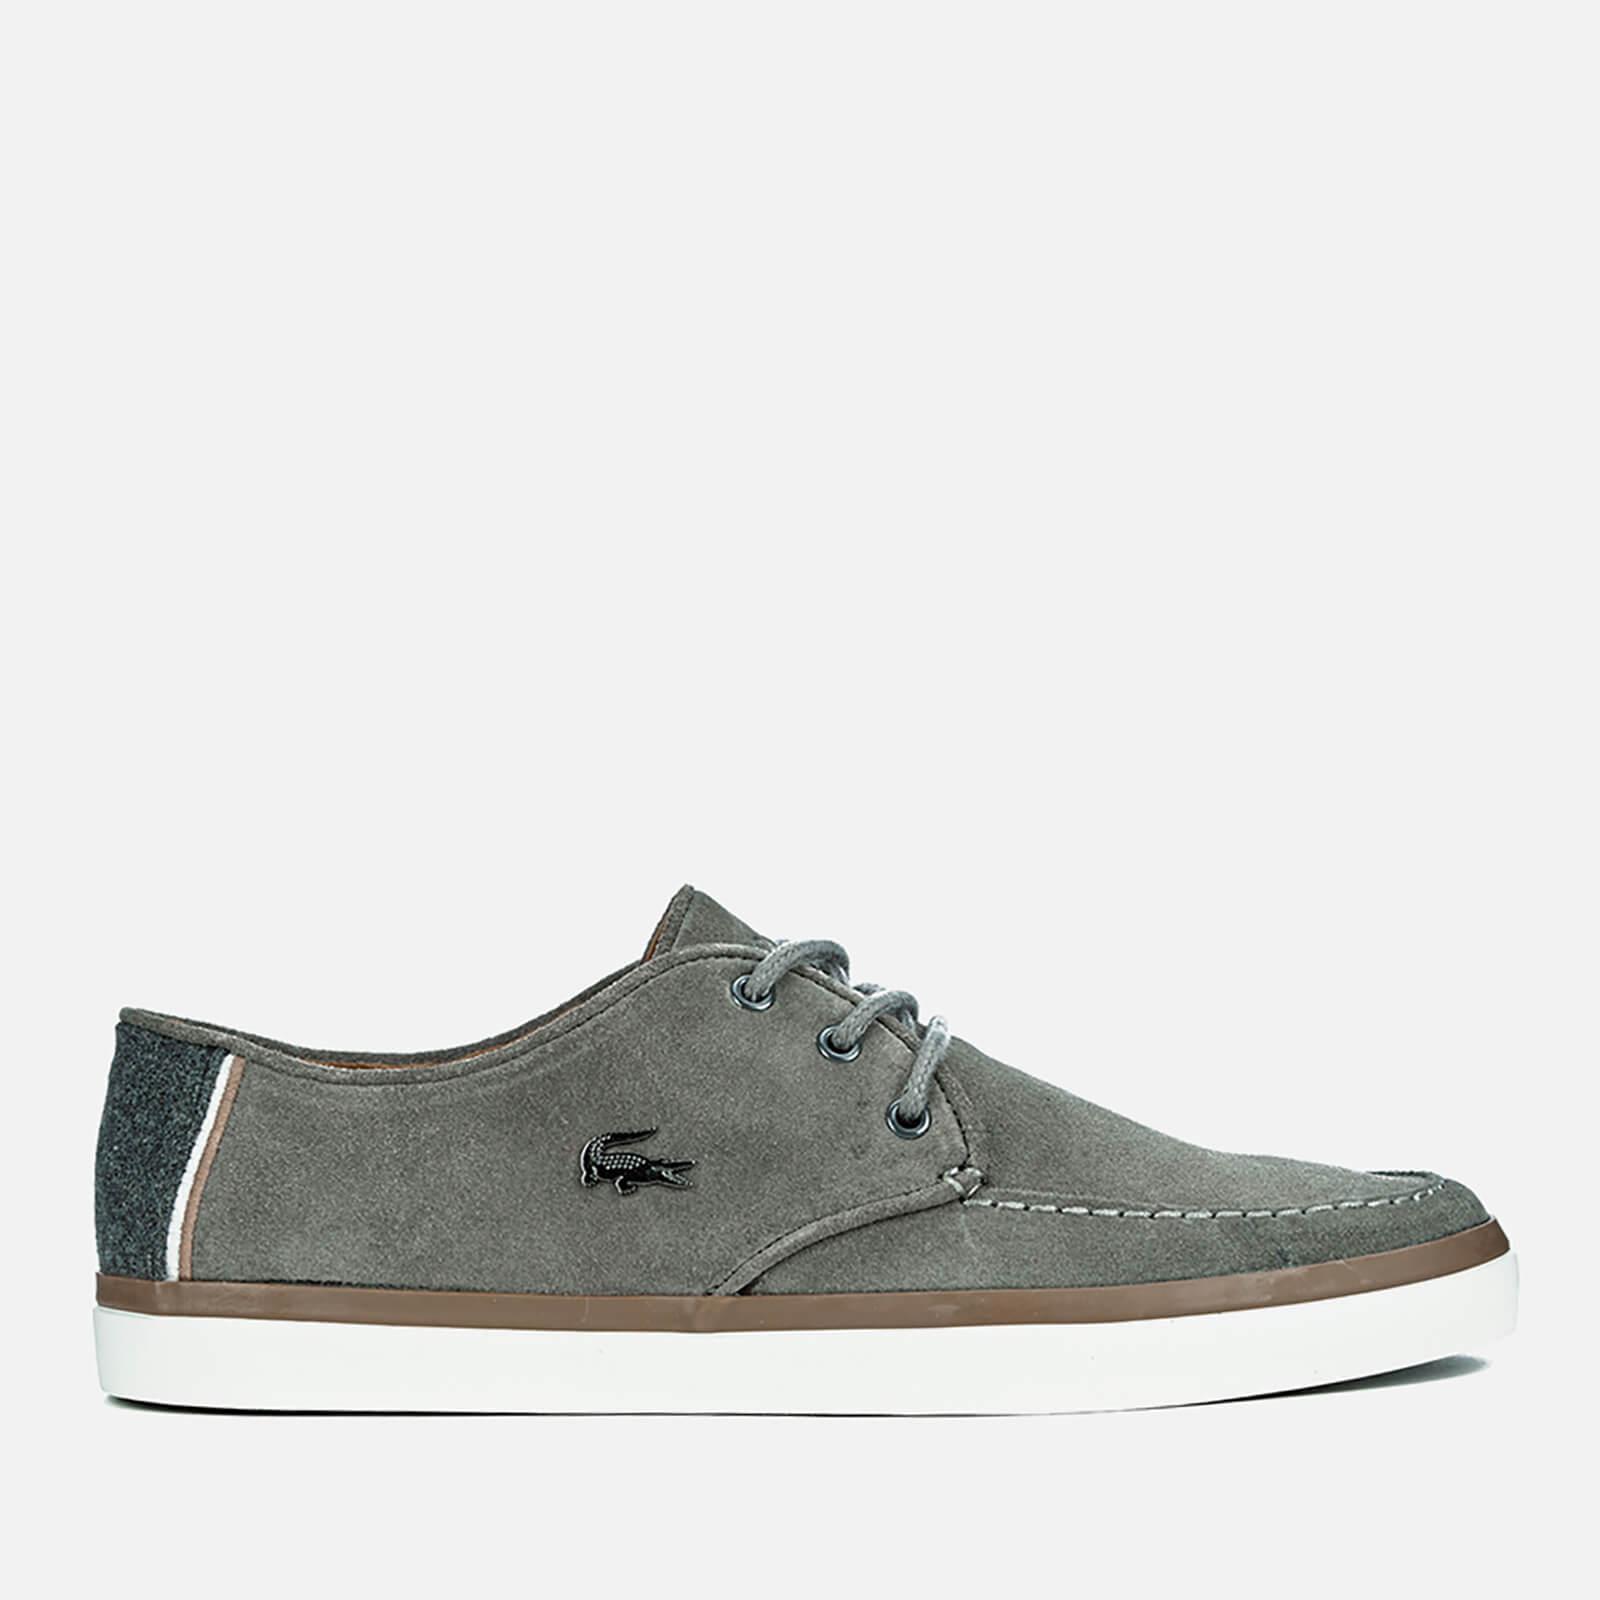 Lacoste Men's Sevrin 2 Lcr Suede Deck Shoes in Grey (Gray) for Men - Lyst